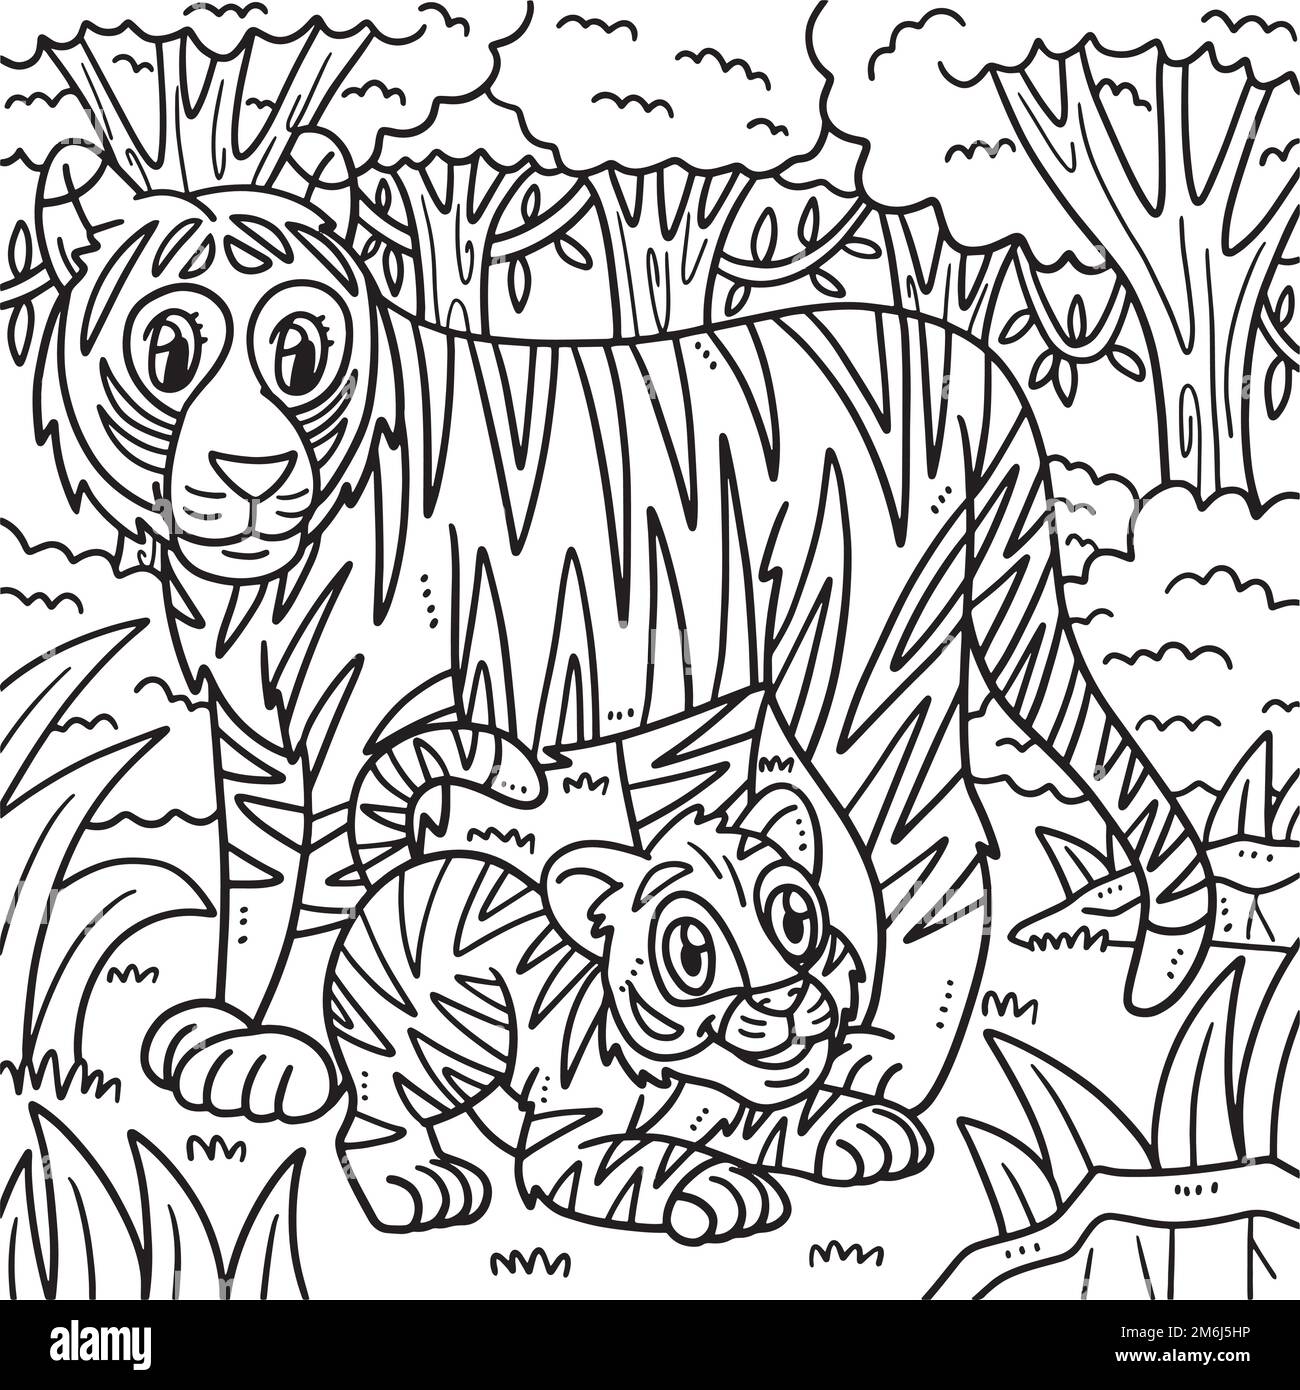 Mother tiger and cub coloring page for kids stock vector image art